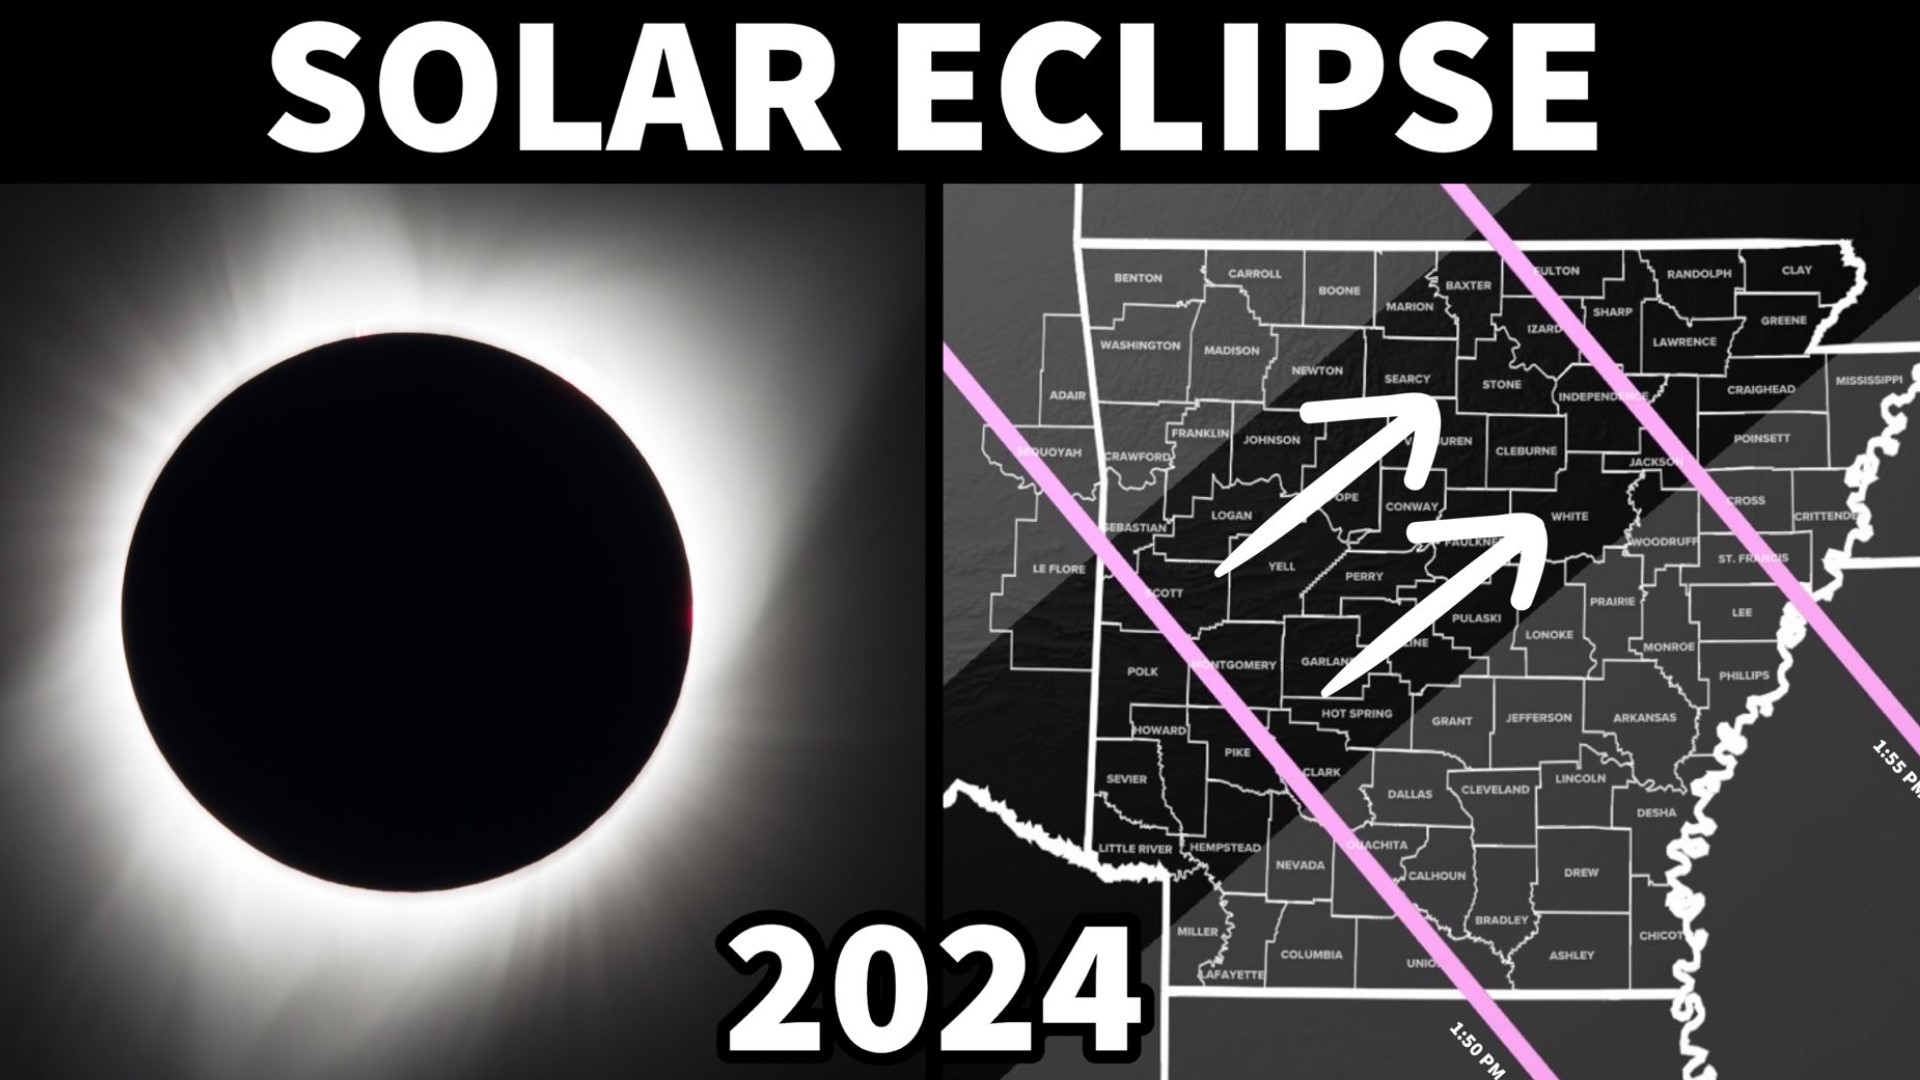 Millions of people are expected to enter the natural state to view the eclipse.